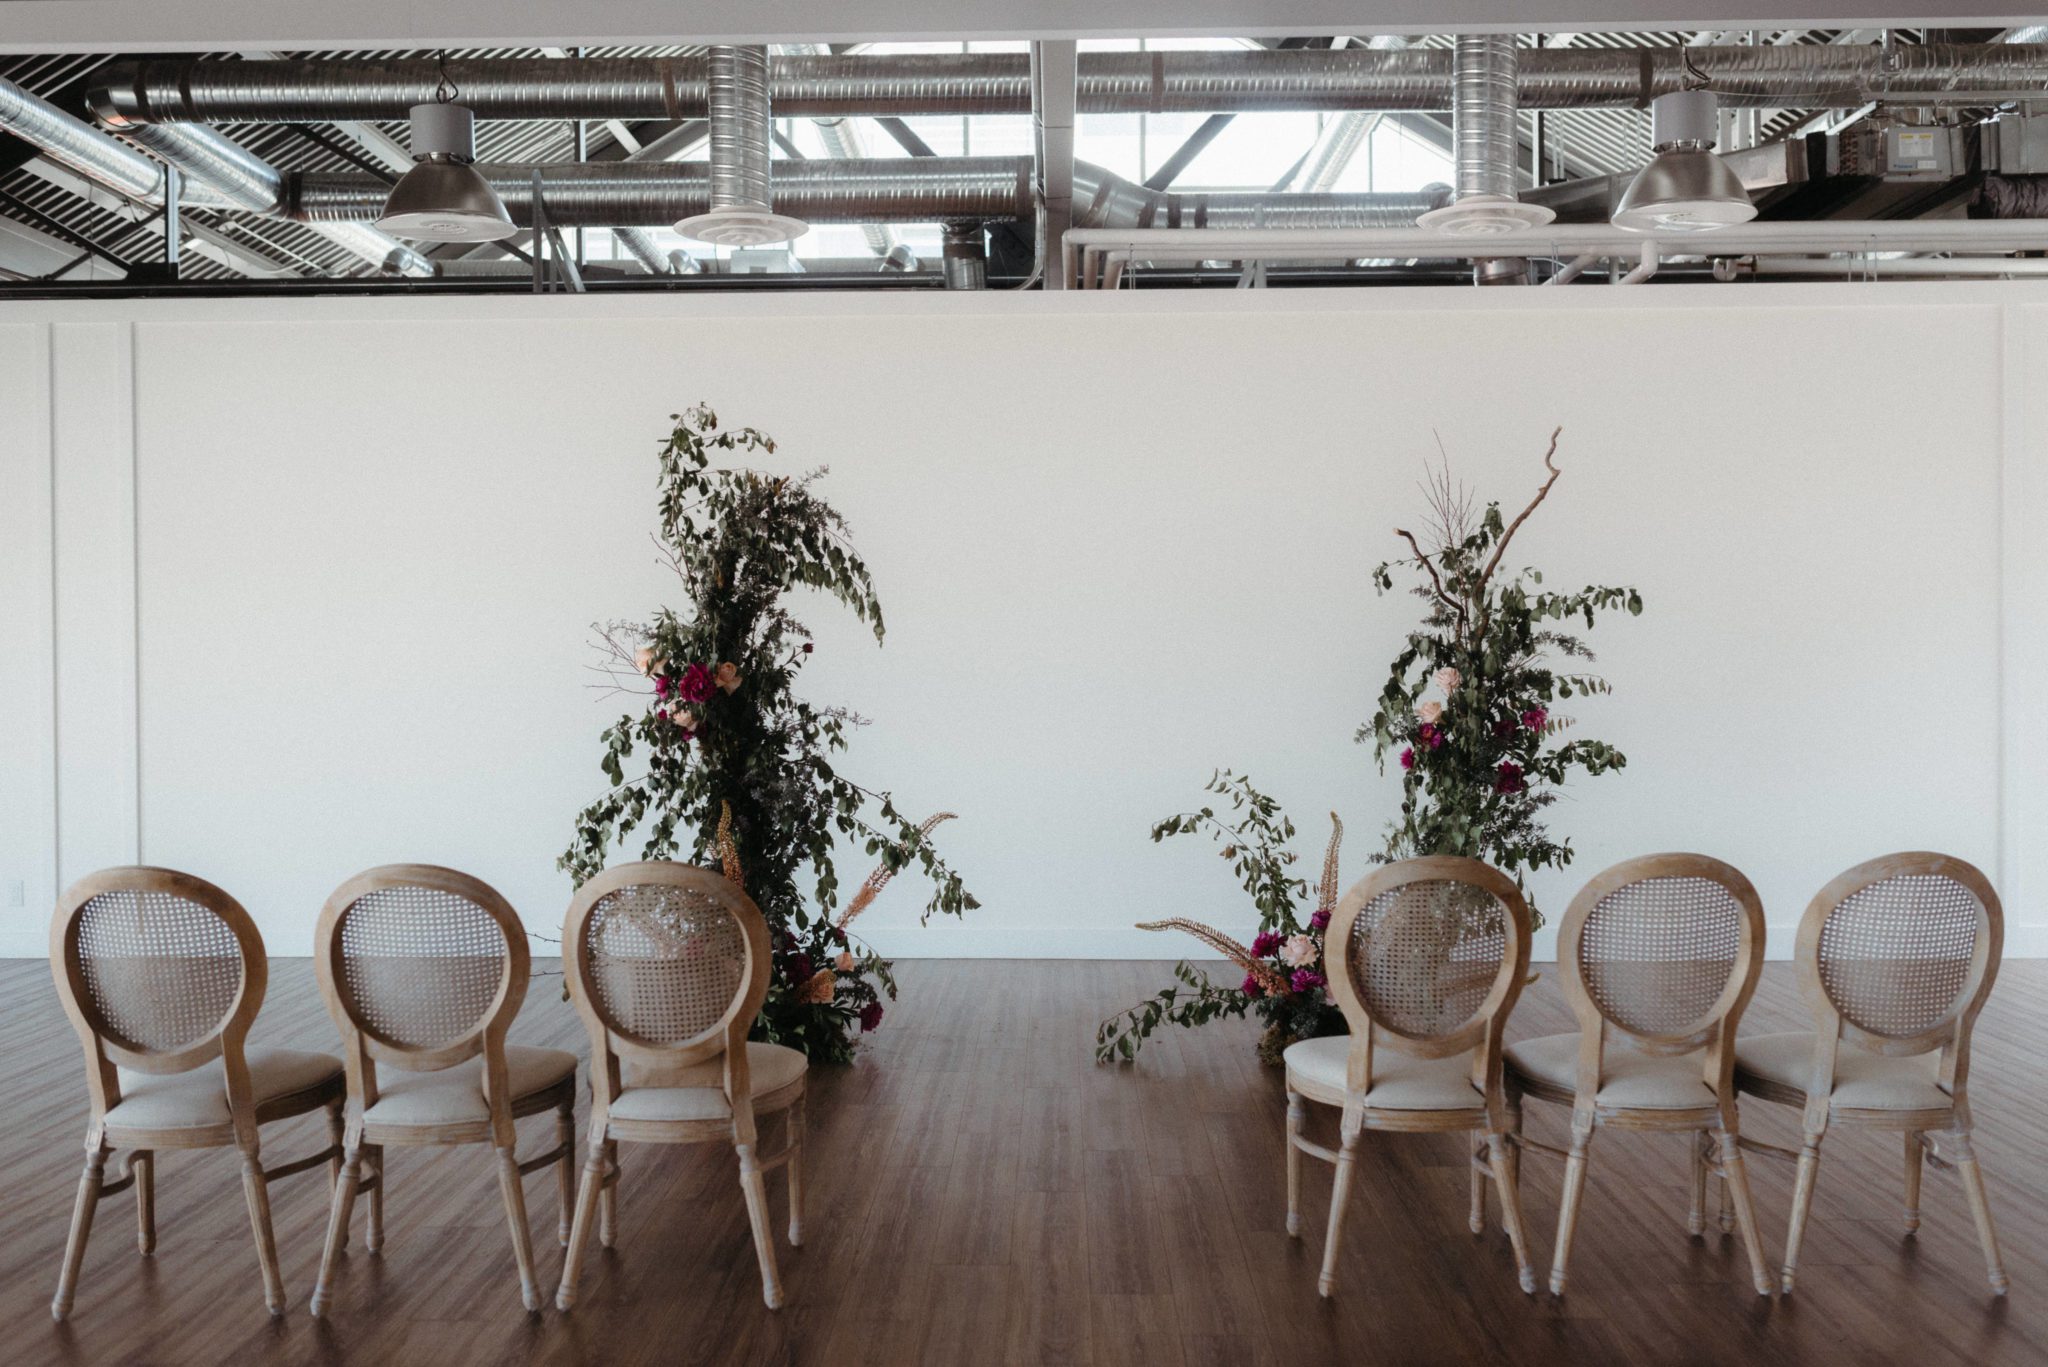 Wallace Venue Wedding decorated with plum and olive florals